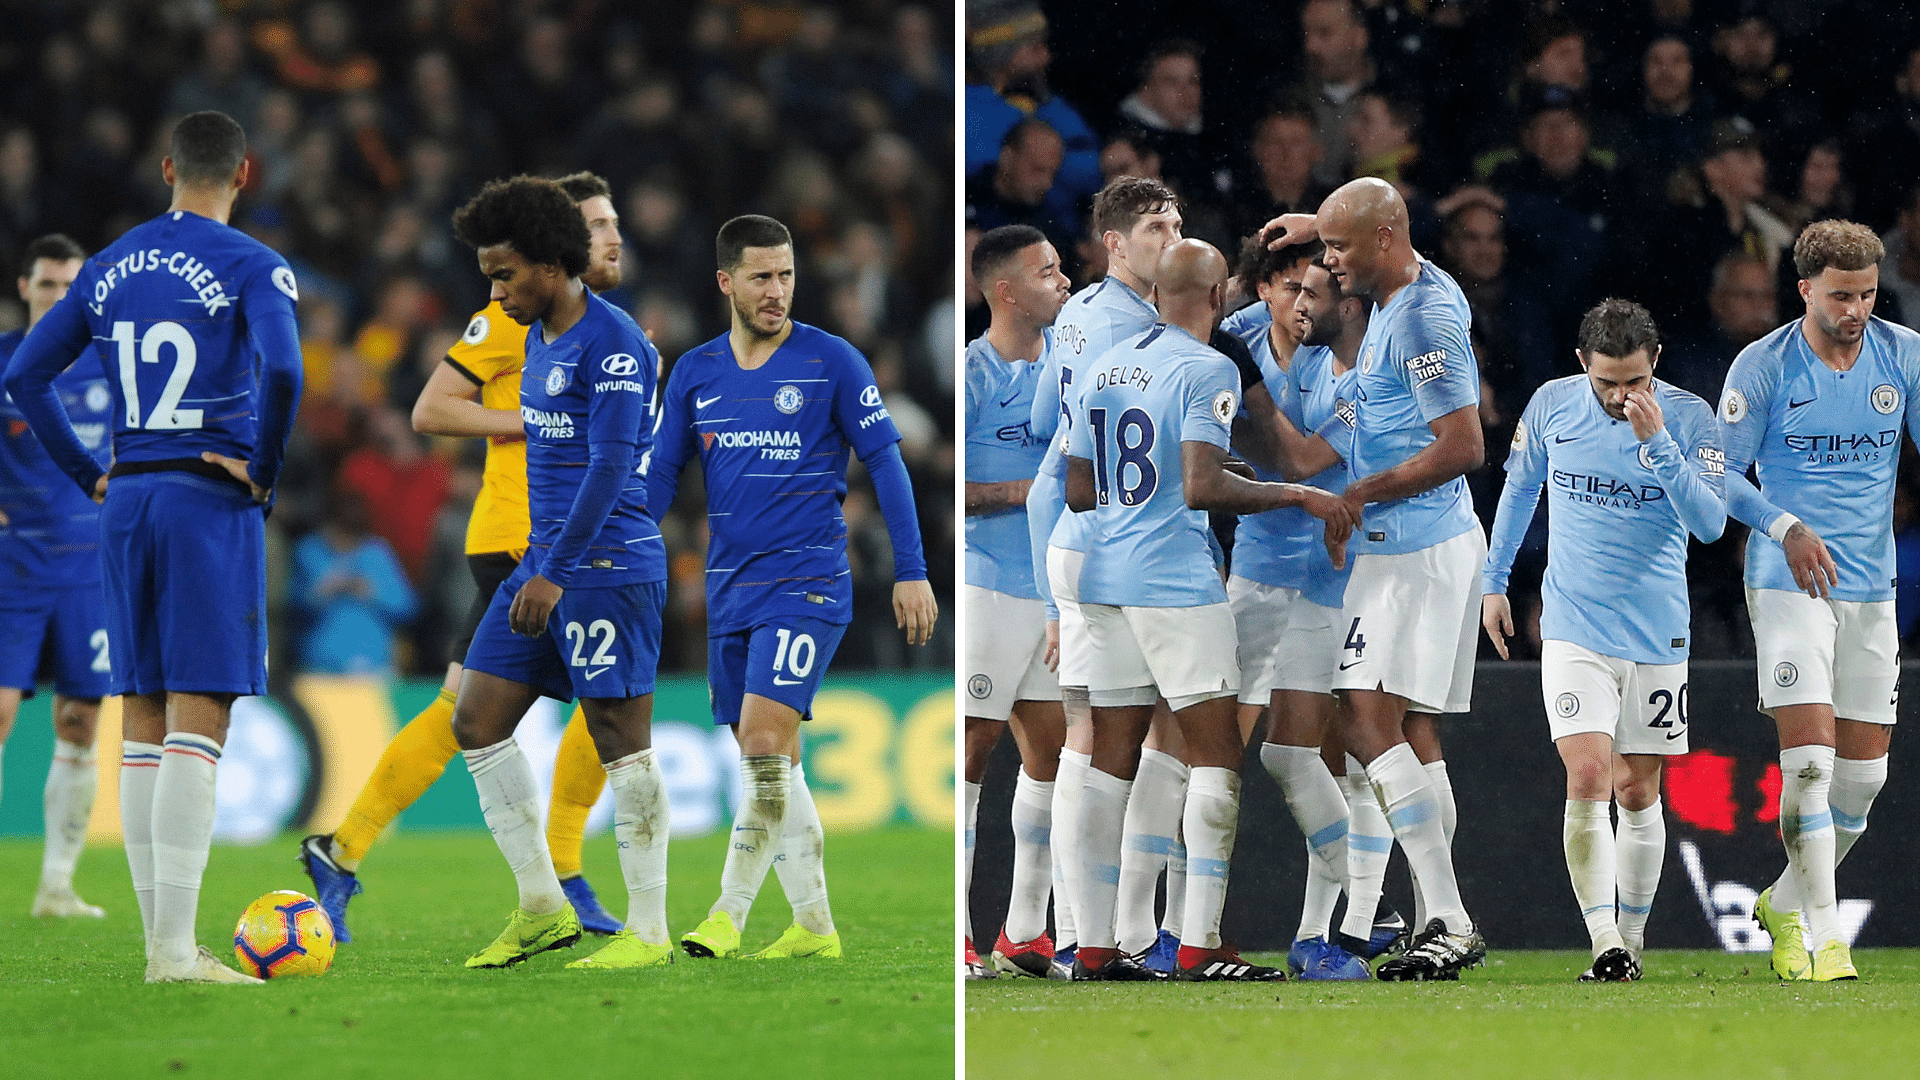 Chelsea have lost two of their last three Premier League games, while Manchester City remain undefeated after 15 matches.